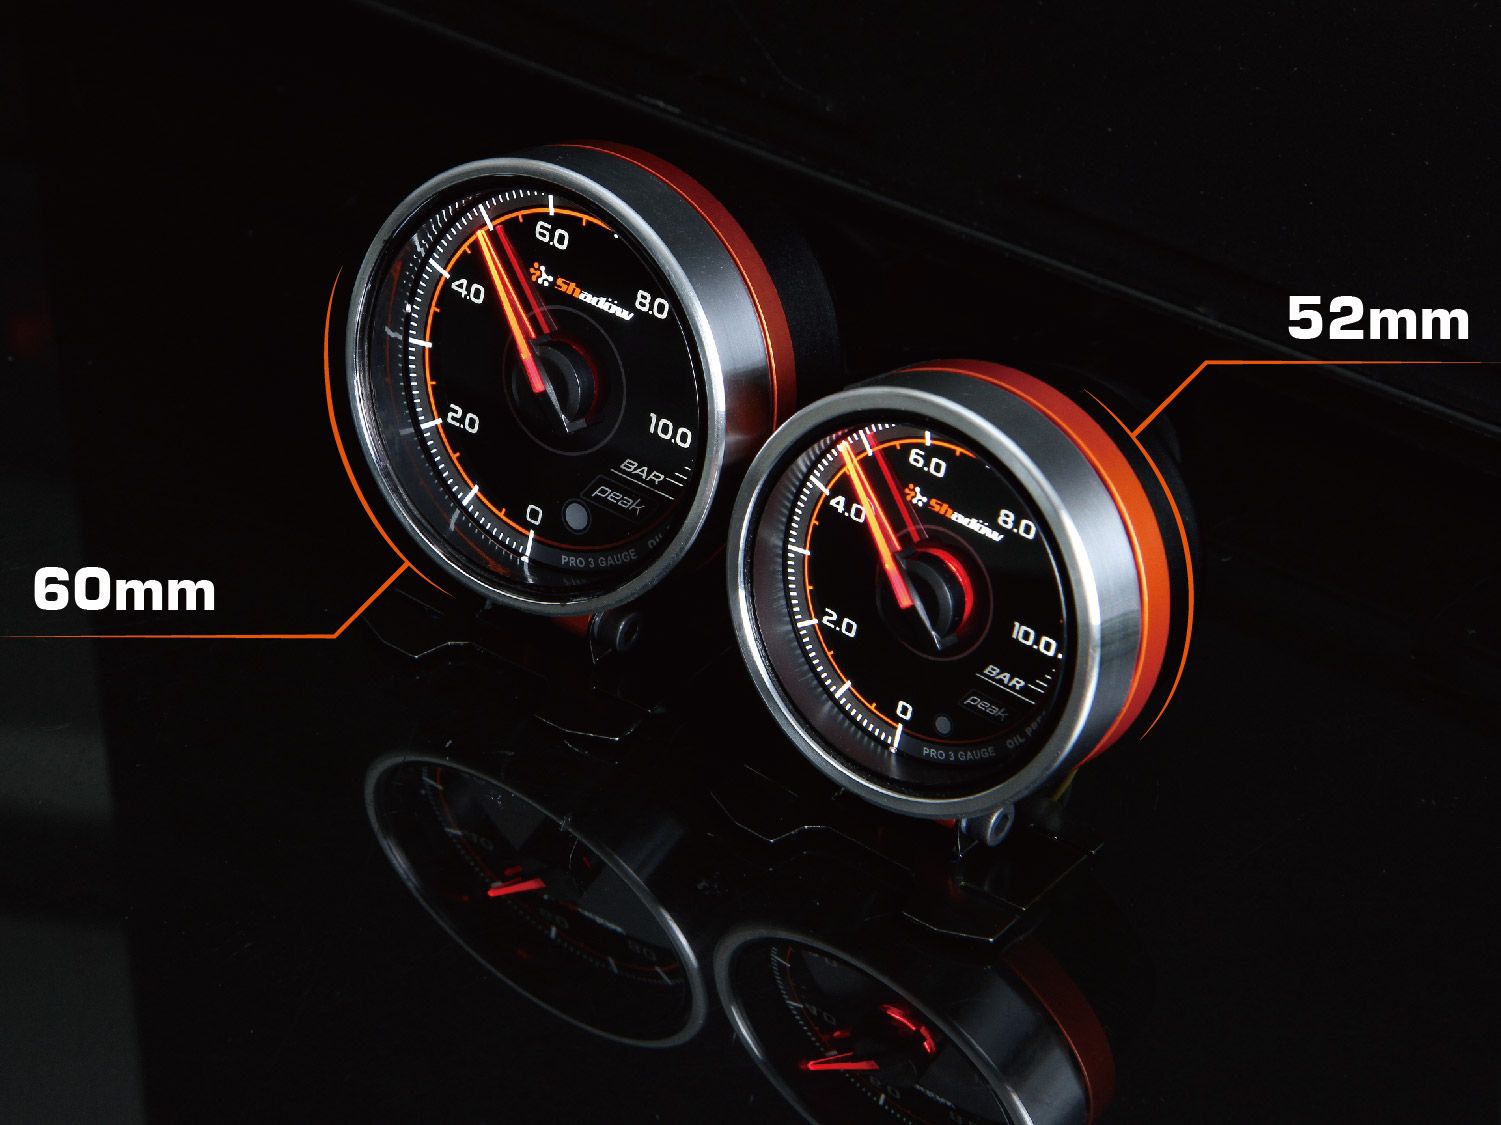 Shadow PRO3 racing gauges are available in 52mm and 60mm sizes